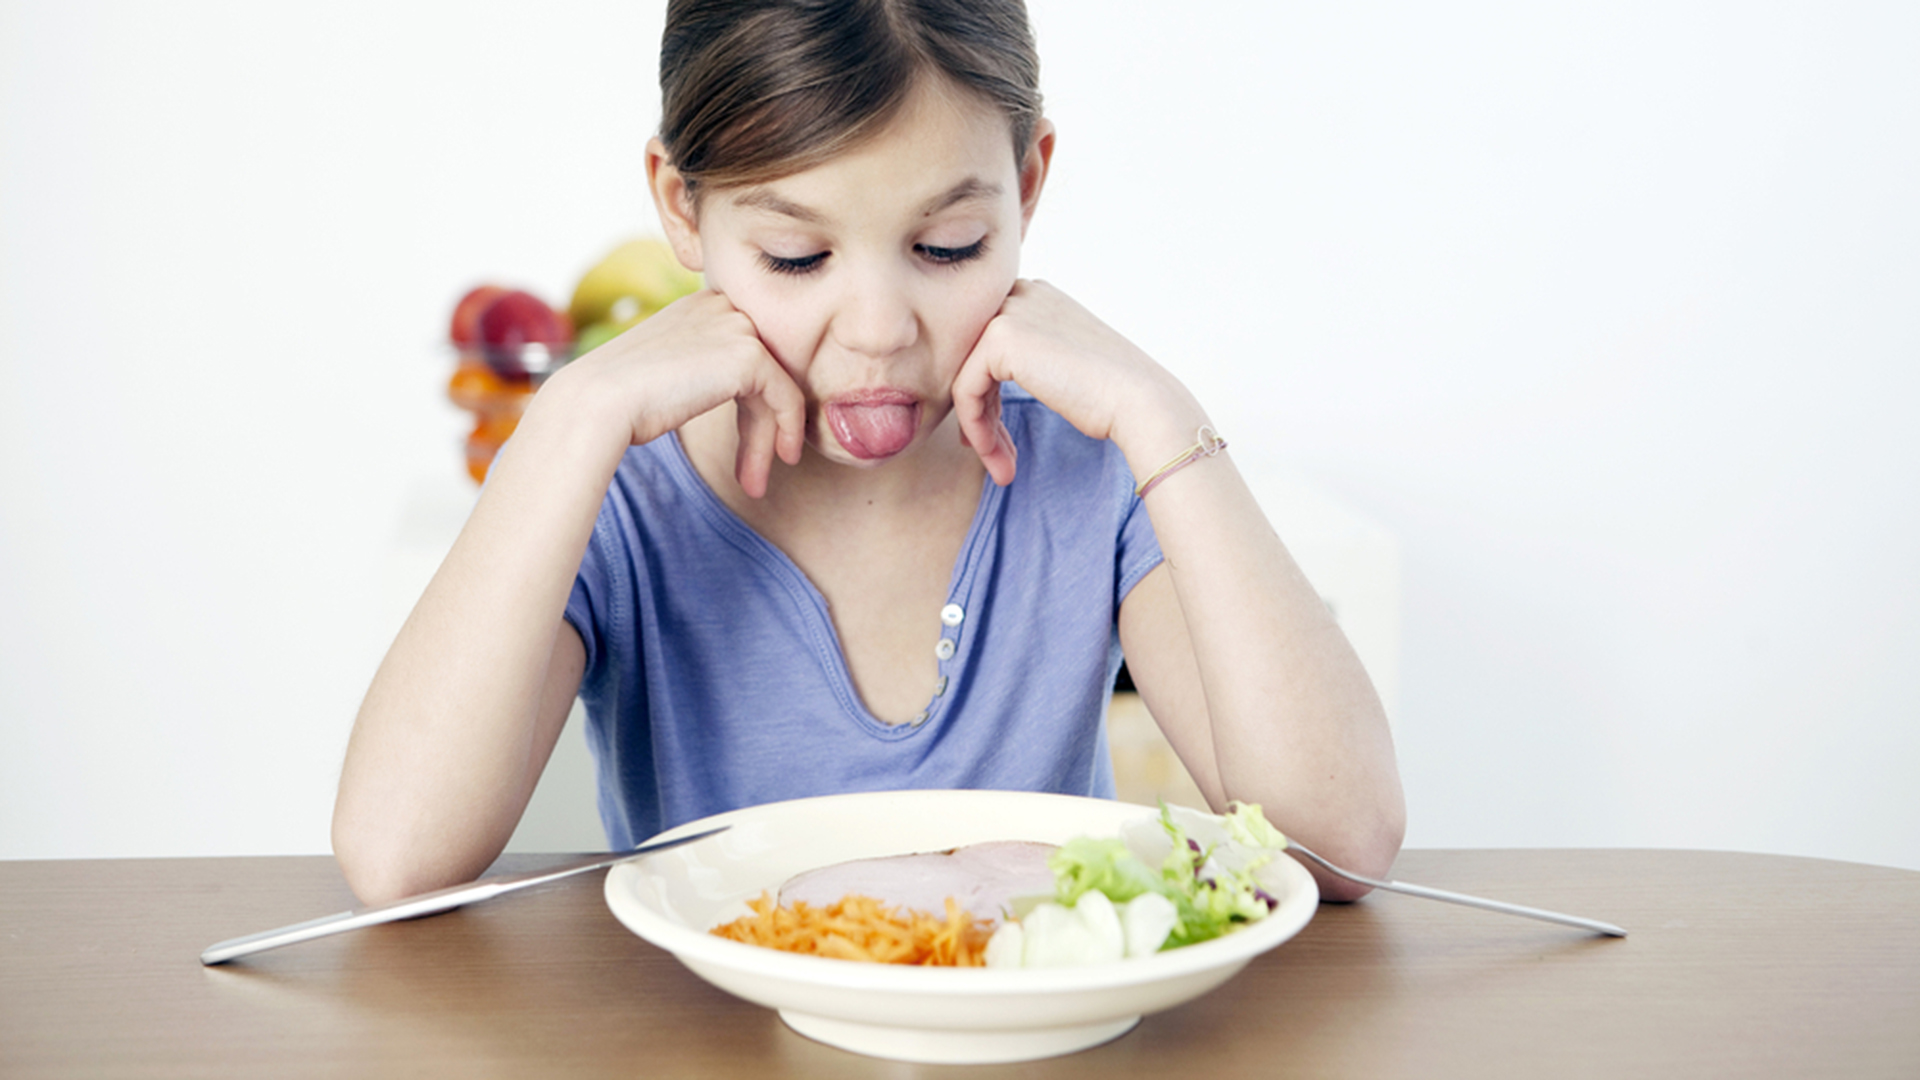 Picky Eaters May Have Psychological Problems, According To Health Study